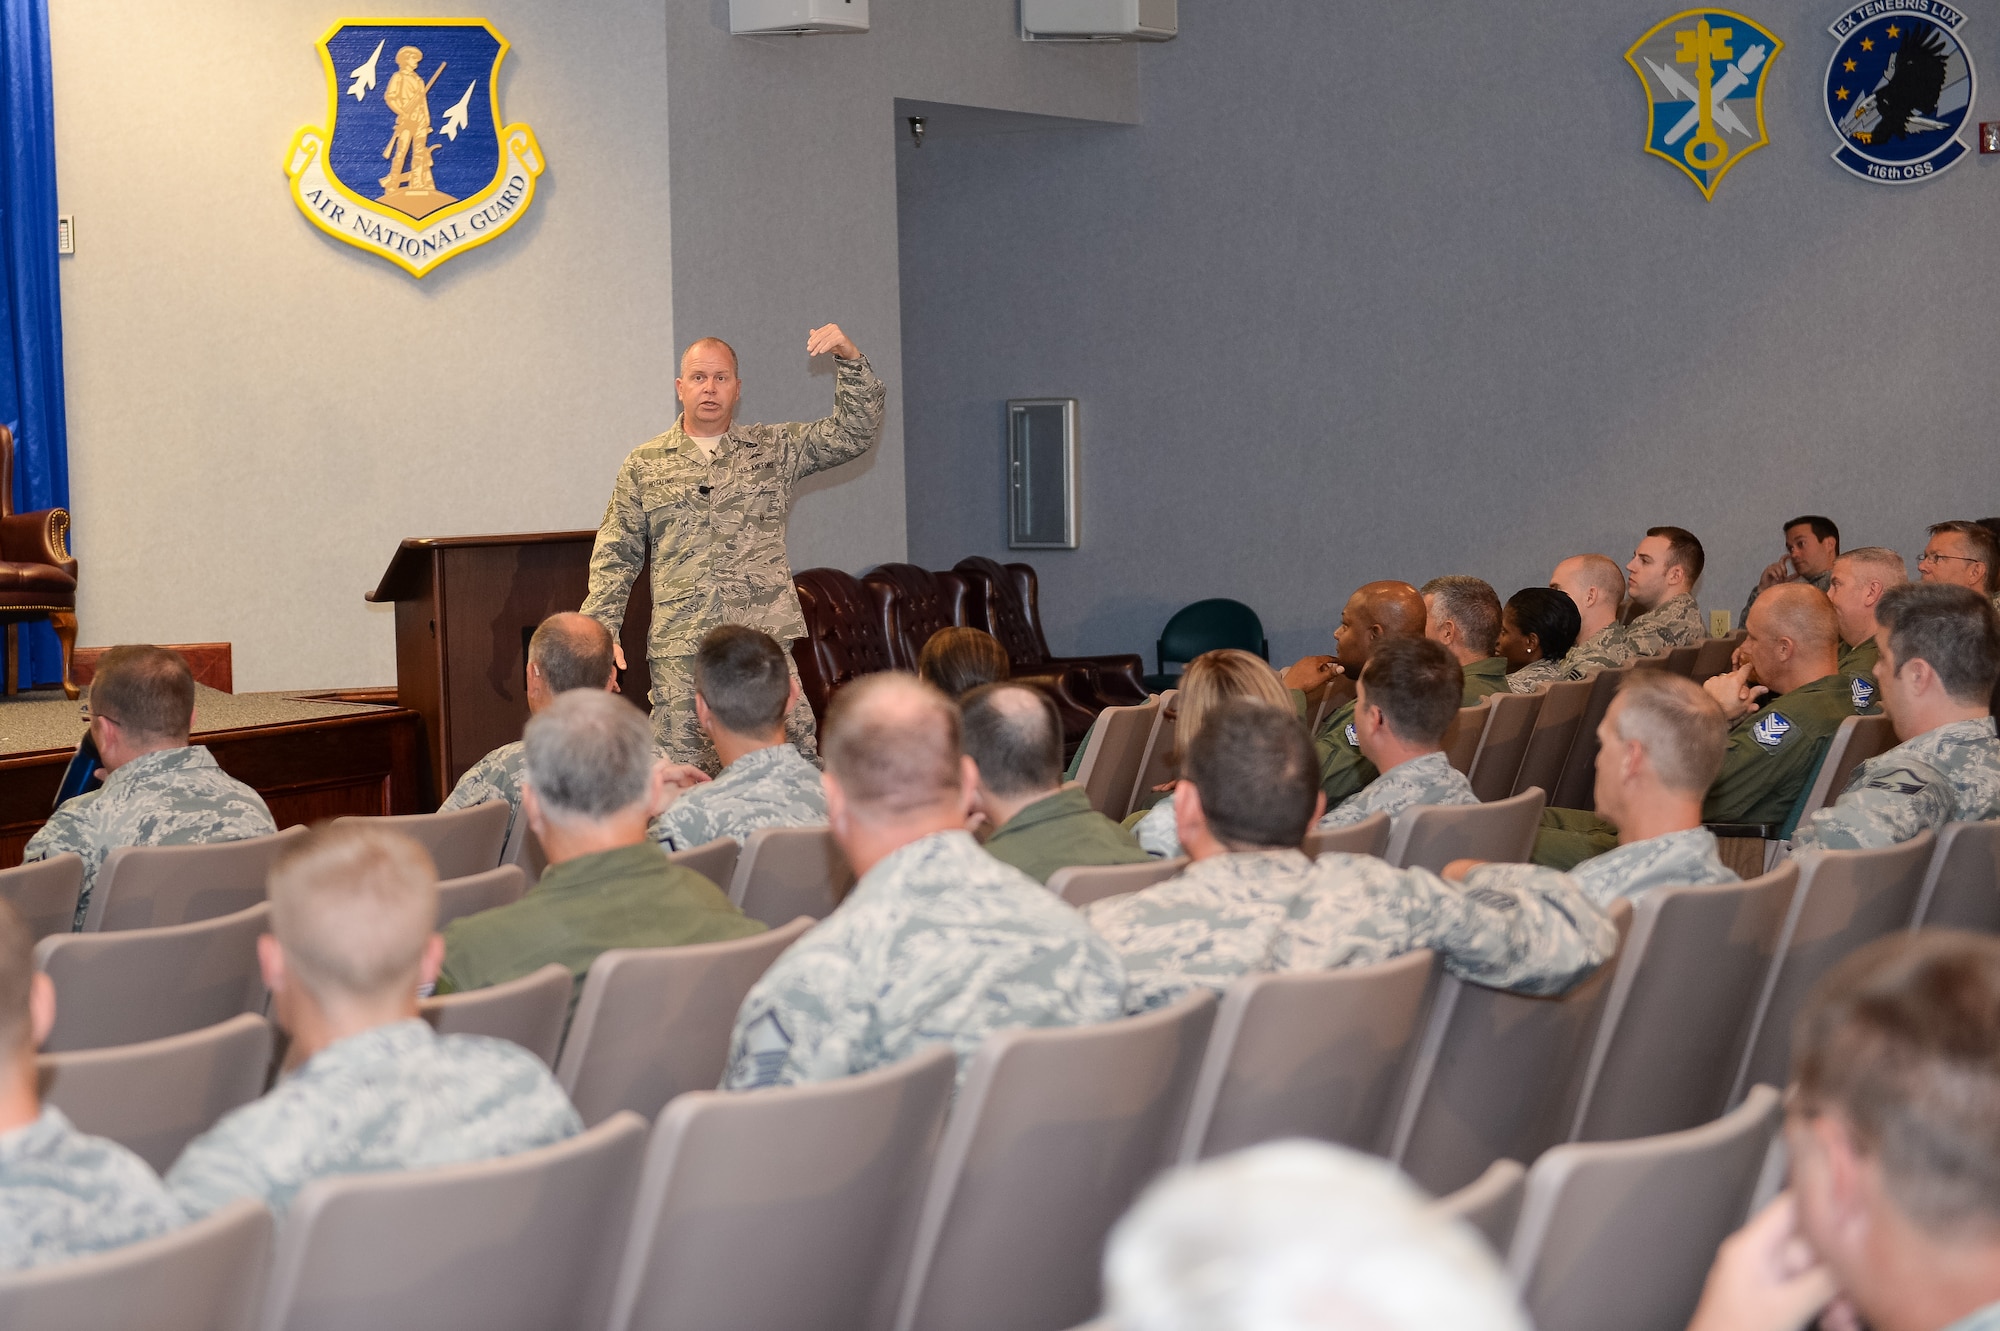 U.S. Air Force Chief Master Sgt. James W. Hotaling, Air National Guard command chief, speaks to Airmen from the 116th Air Control Wing and 202nd Engineering Installation Squadron, Georgia Air National Guard, during an enlisted all call at Robins Air Force Base, Ga., July 16, 2015. During his visit, Hotaling conducted two town hall style meetings and met with key enlisted leadership councils and Airmen resiliency representatives. His time with the Airmen focused on sharing his message of a renewed commitment to the profession of arms, health of the force, and recognition of our Airmen and accomplishments. The visit offered the opportunity for Airmen in the wing to meet their top leader, share their concerns and gain perspective from the national level. (U.S. Air National Guard photo by Tech. Sgt. Regina Young/Released)